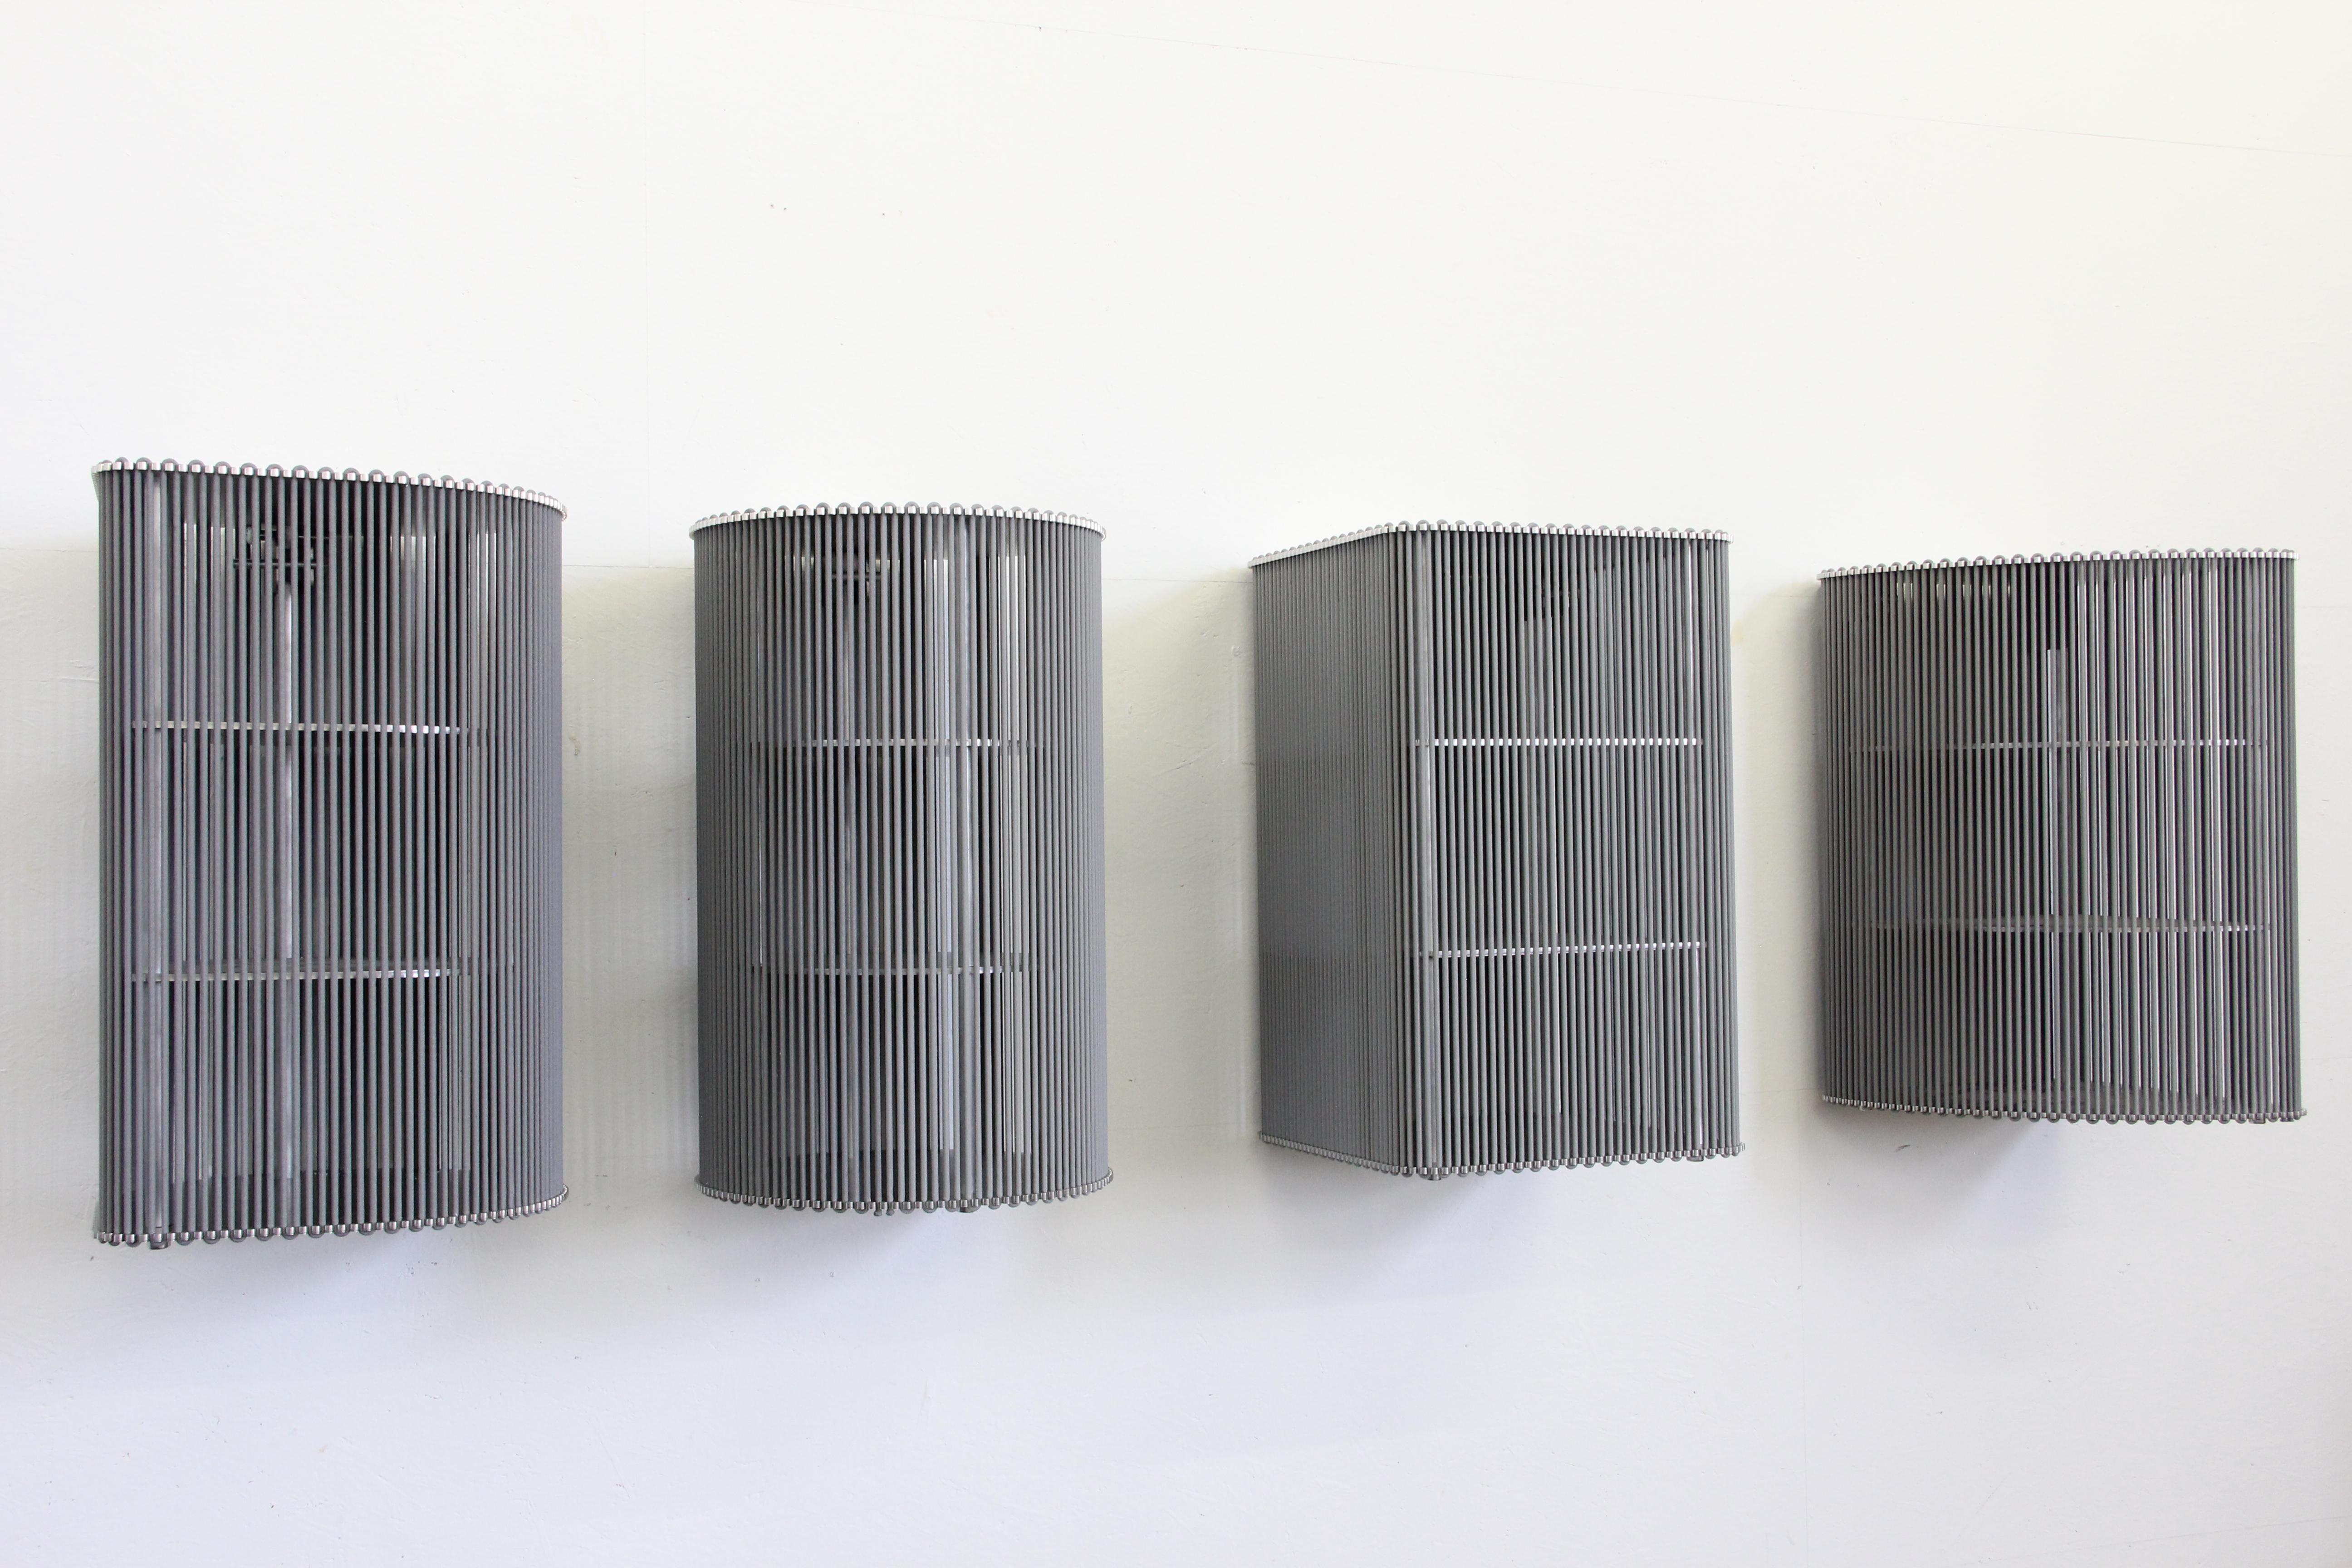 Aluminum Coil Cabinet Wall Mounted by Bram Kerkhofs For Sale